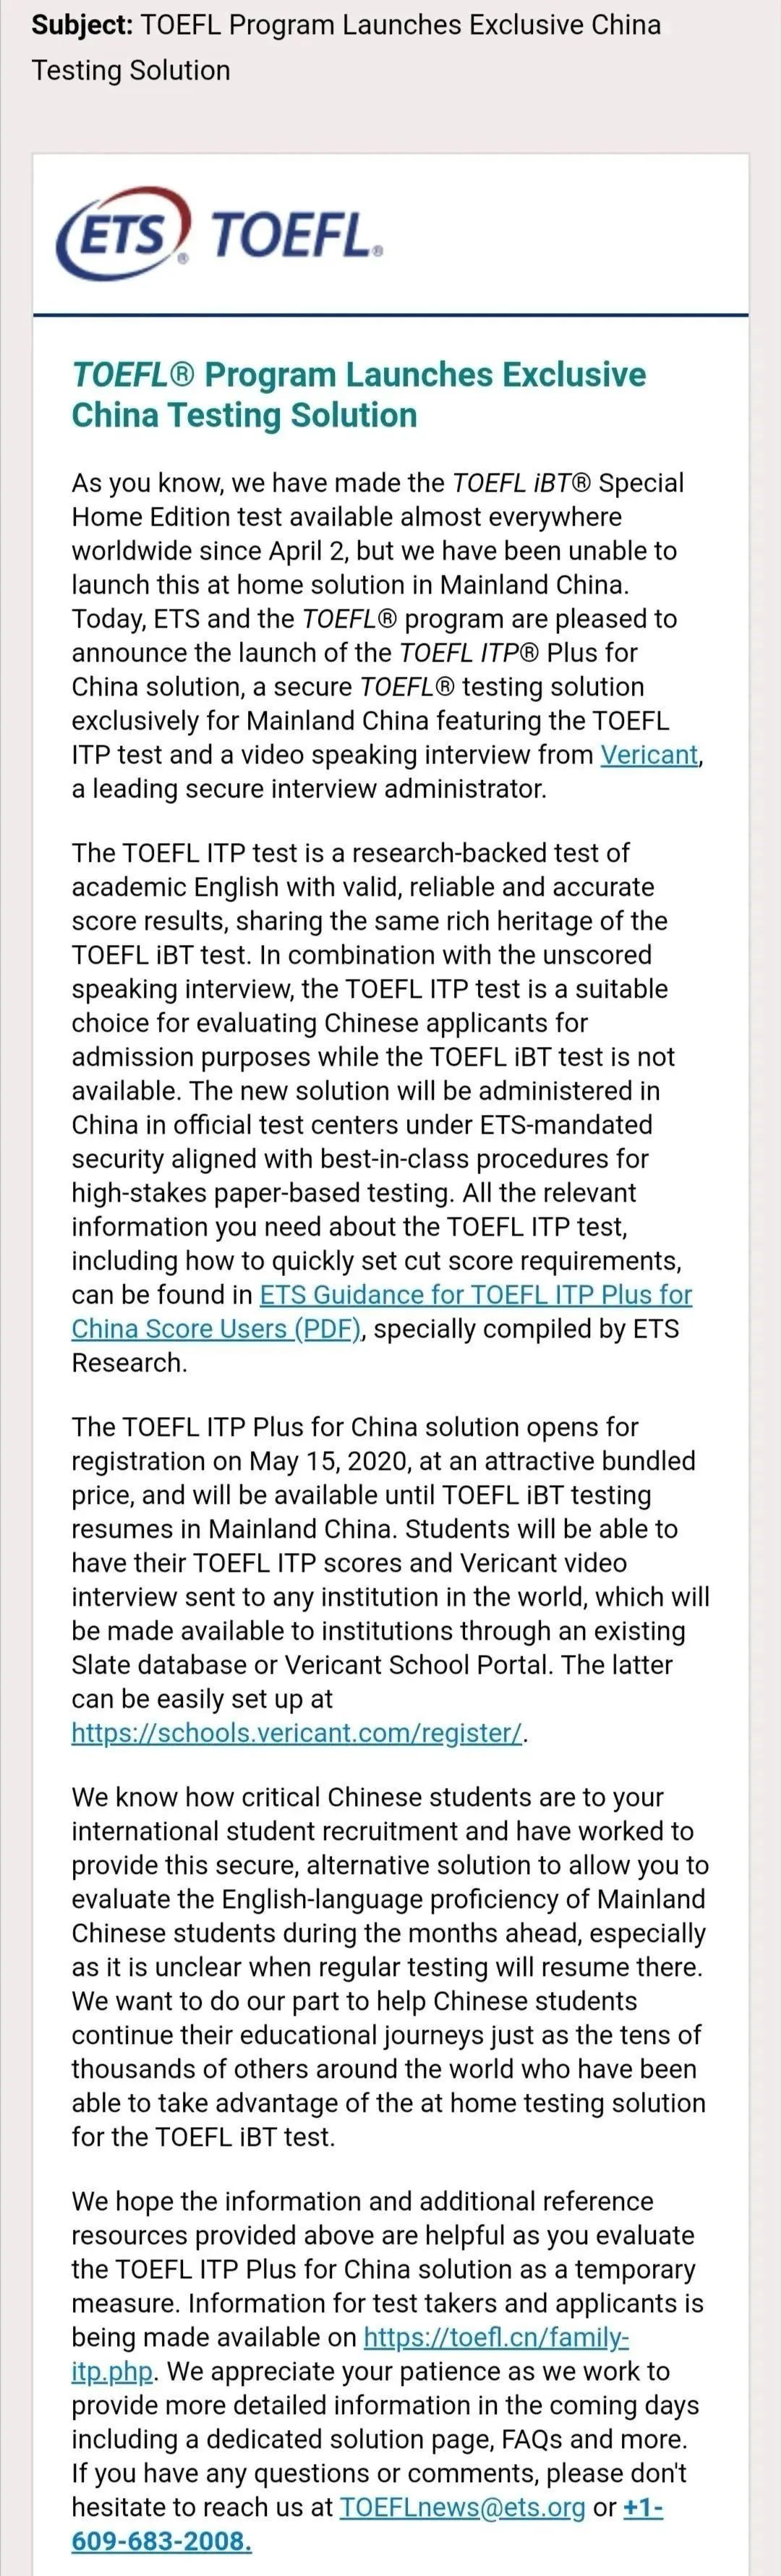 TOEFL ITP Plus for China.png